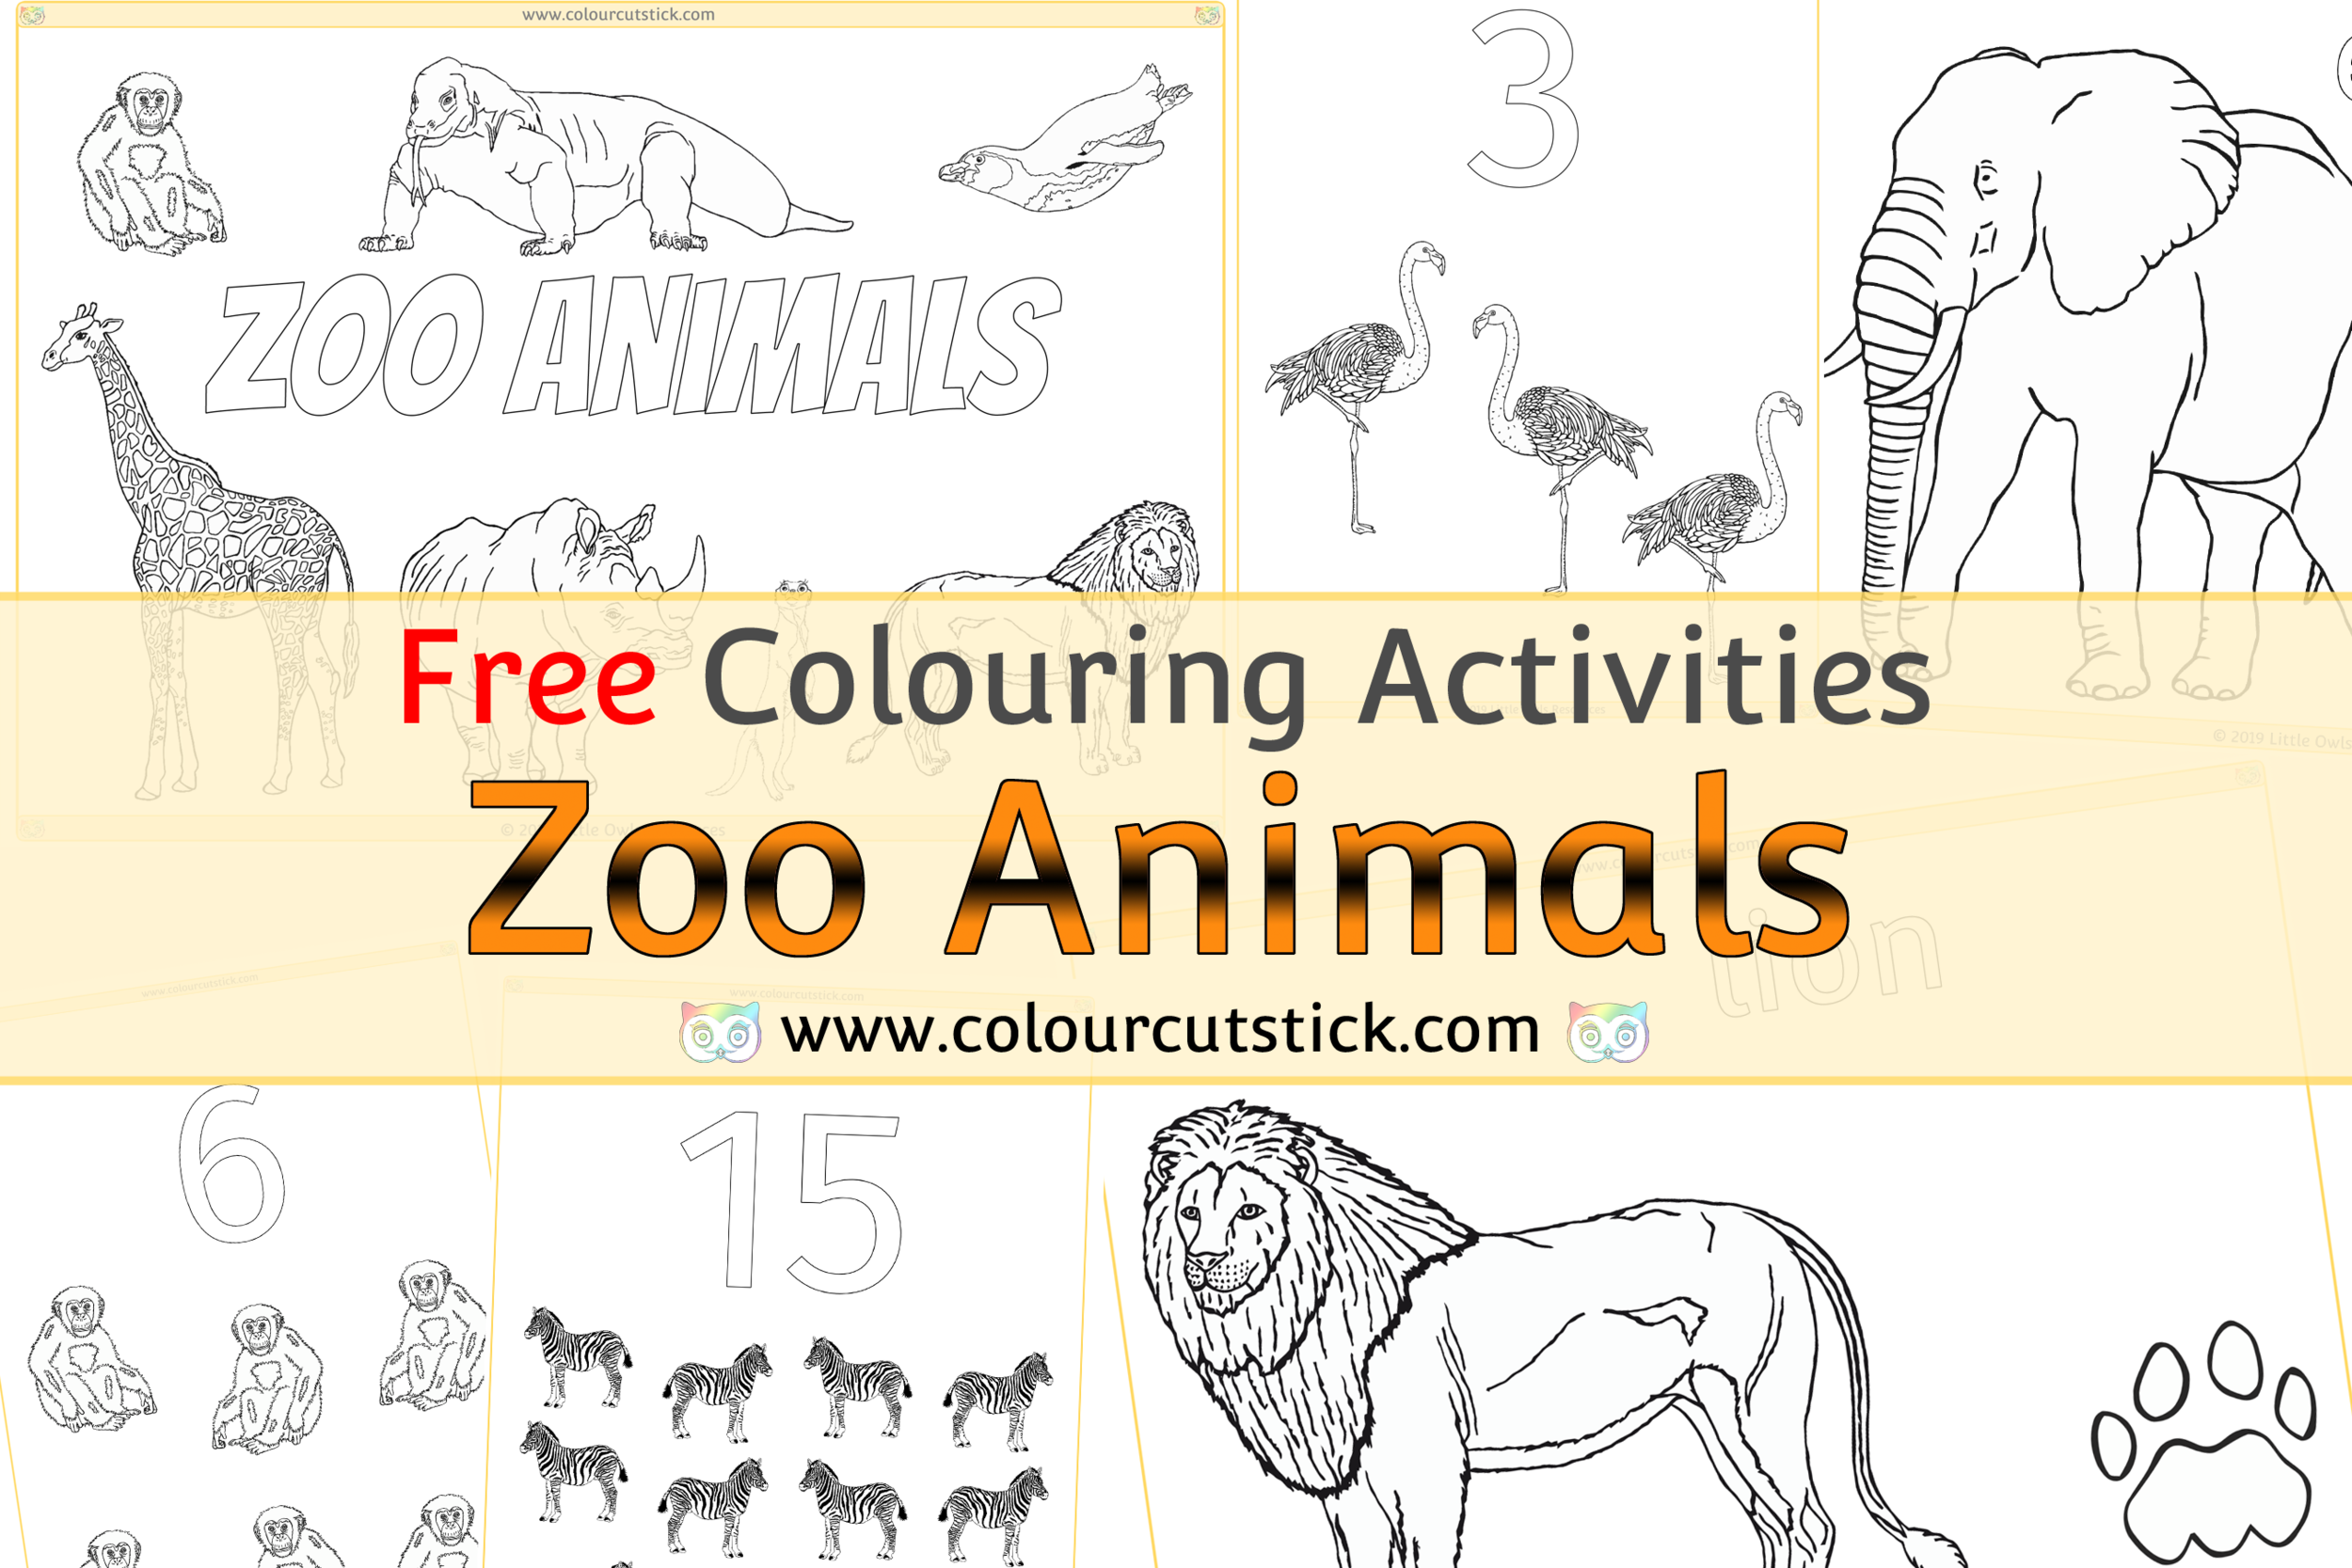 Free Zoo Animals Colouring Coloring Pages For Children Kids Toddlers Preschoolers Early Years Colour Cut Stick Free Colouring Activities